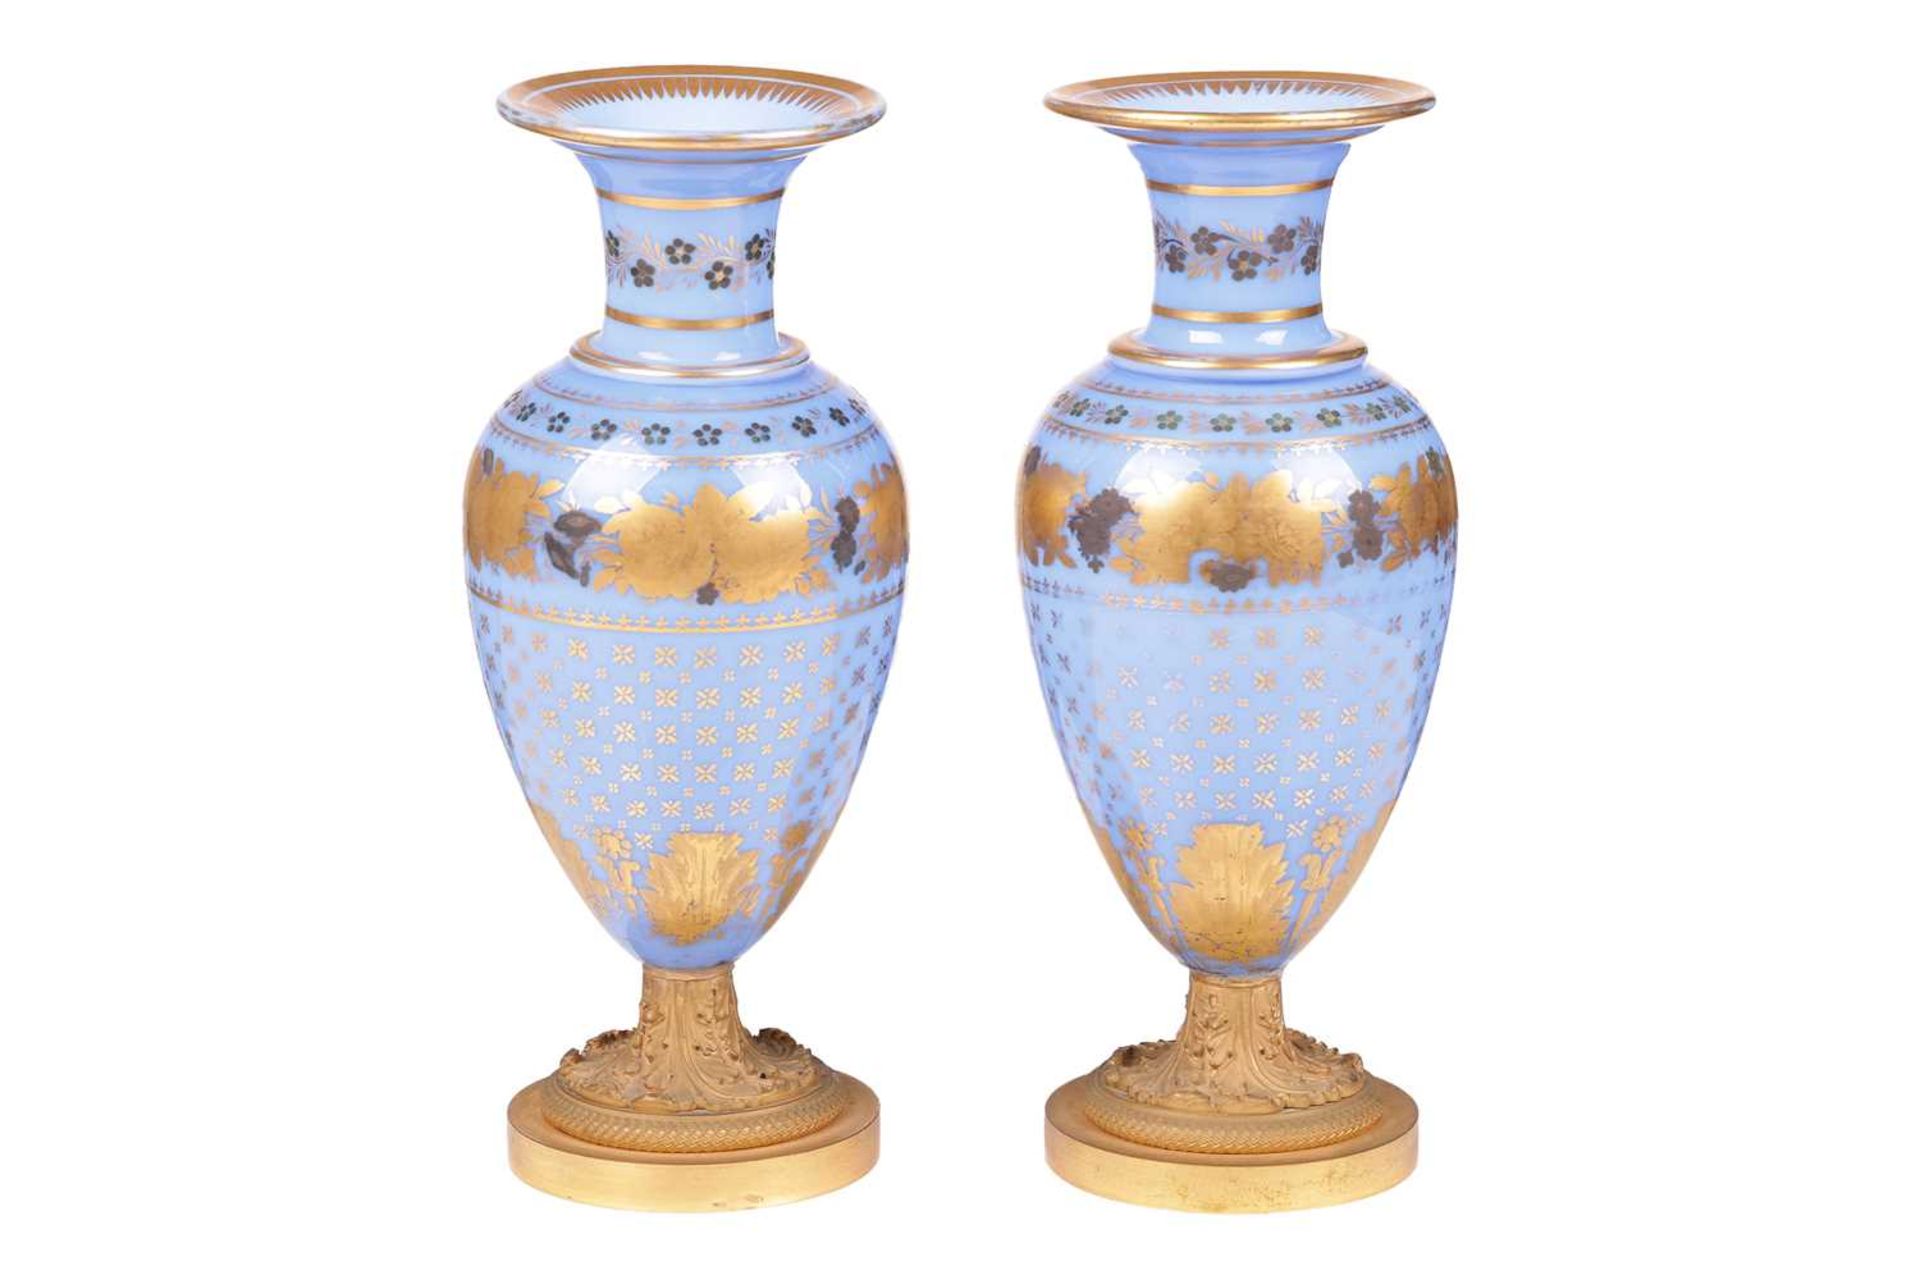 A pair of late 19th century French blue opaline glass and ormolu mounted vases, with gilt-overlaid d